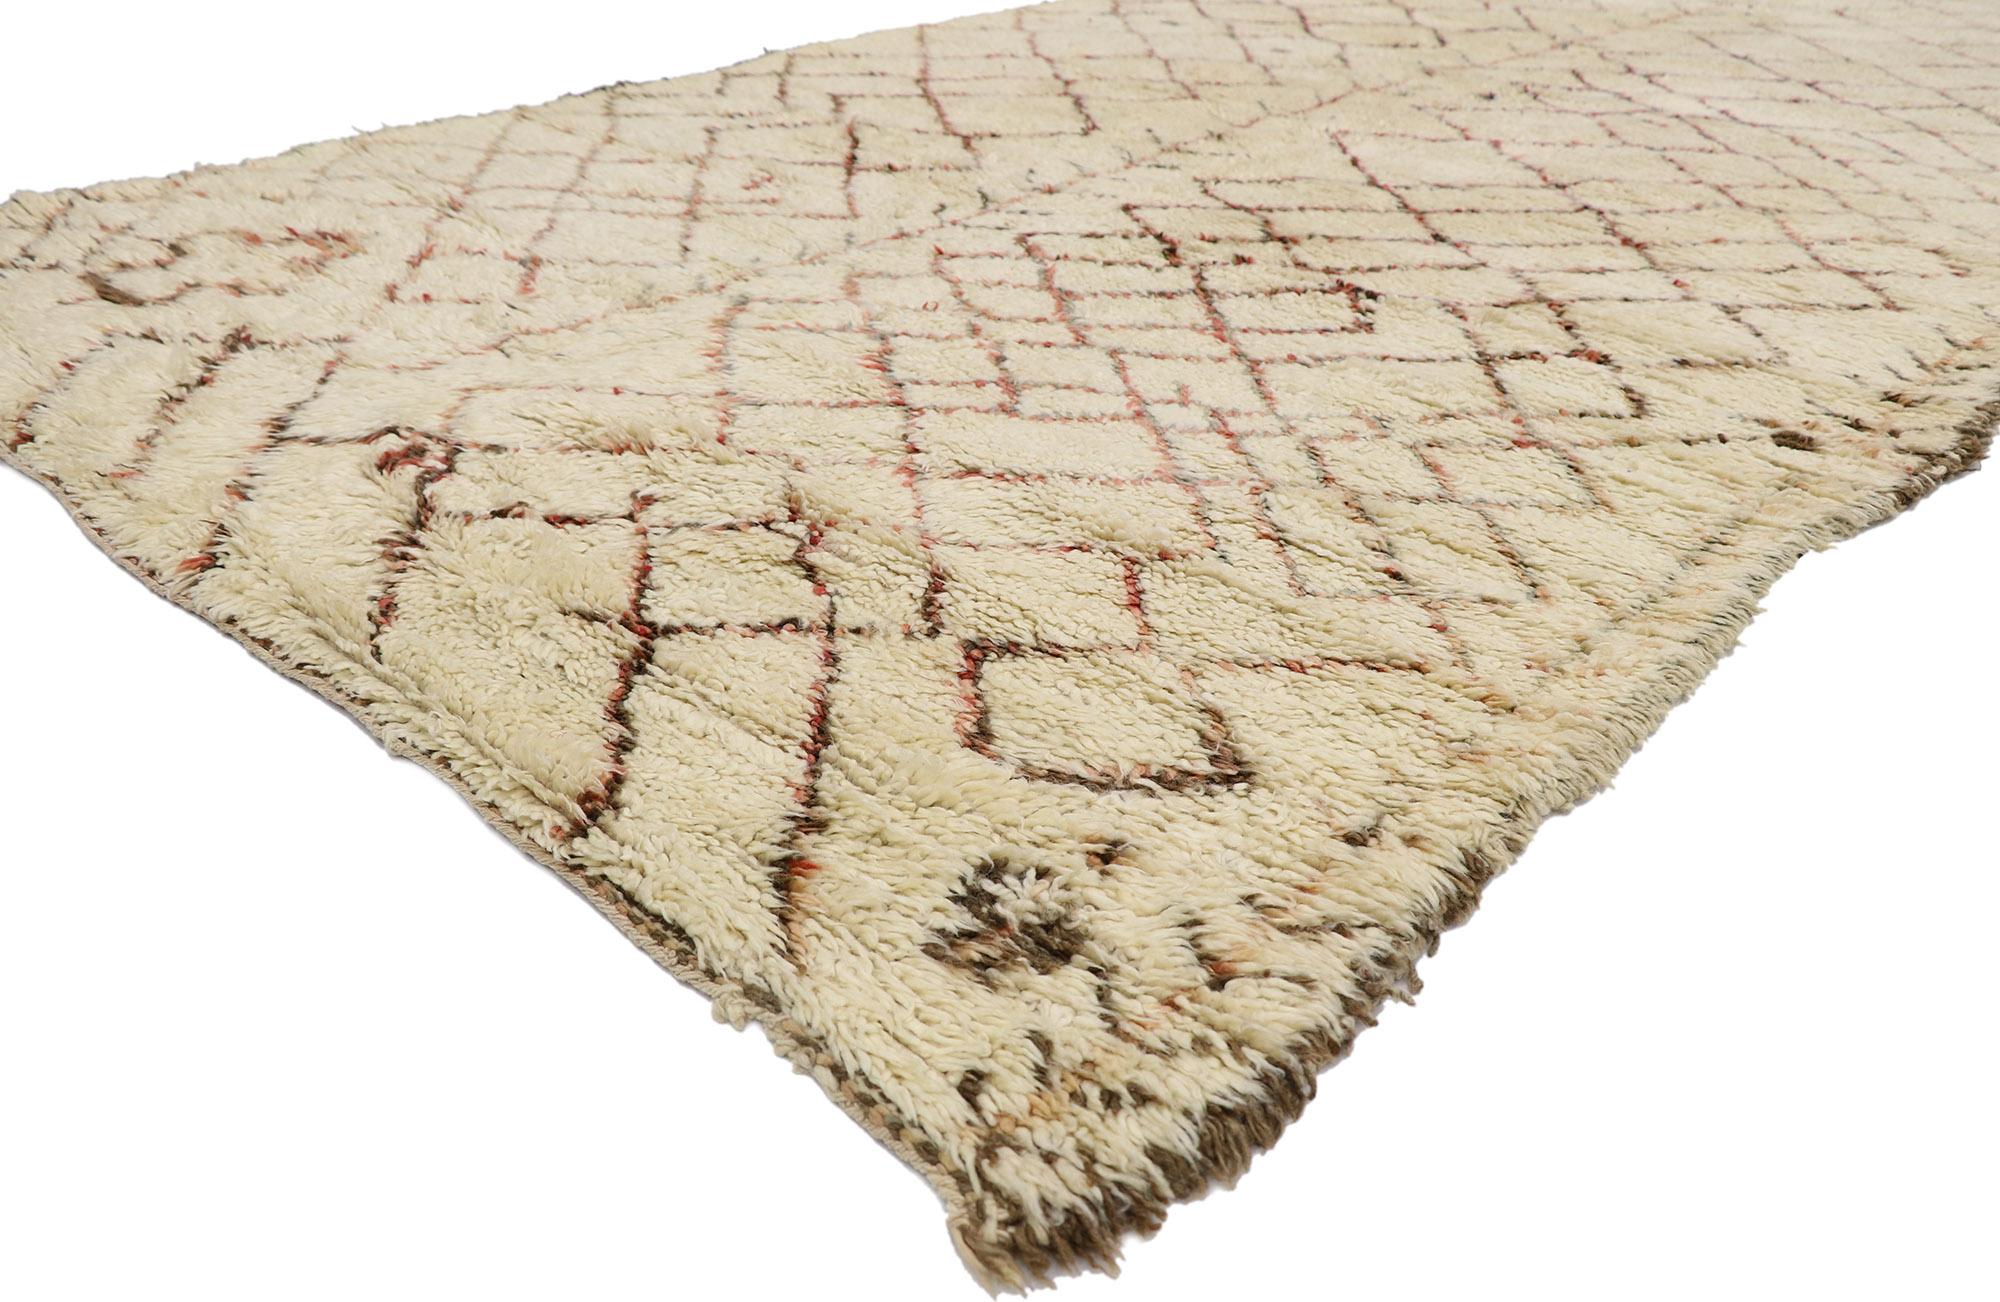 21413 Vintage Berber Moroccan Beni Ourain rug 05'08 x 10'07. With its simplicity, plush pile and Mid-Century Modern style, this hand knotted wool vintage Berber Beni Ourain Moroccan rug is a captivating vision of woven beauty. It features a lozenge